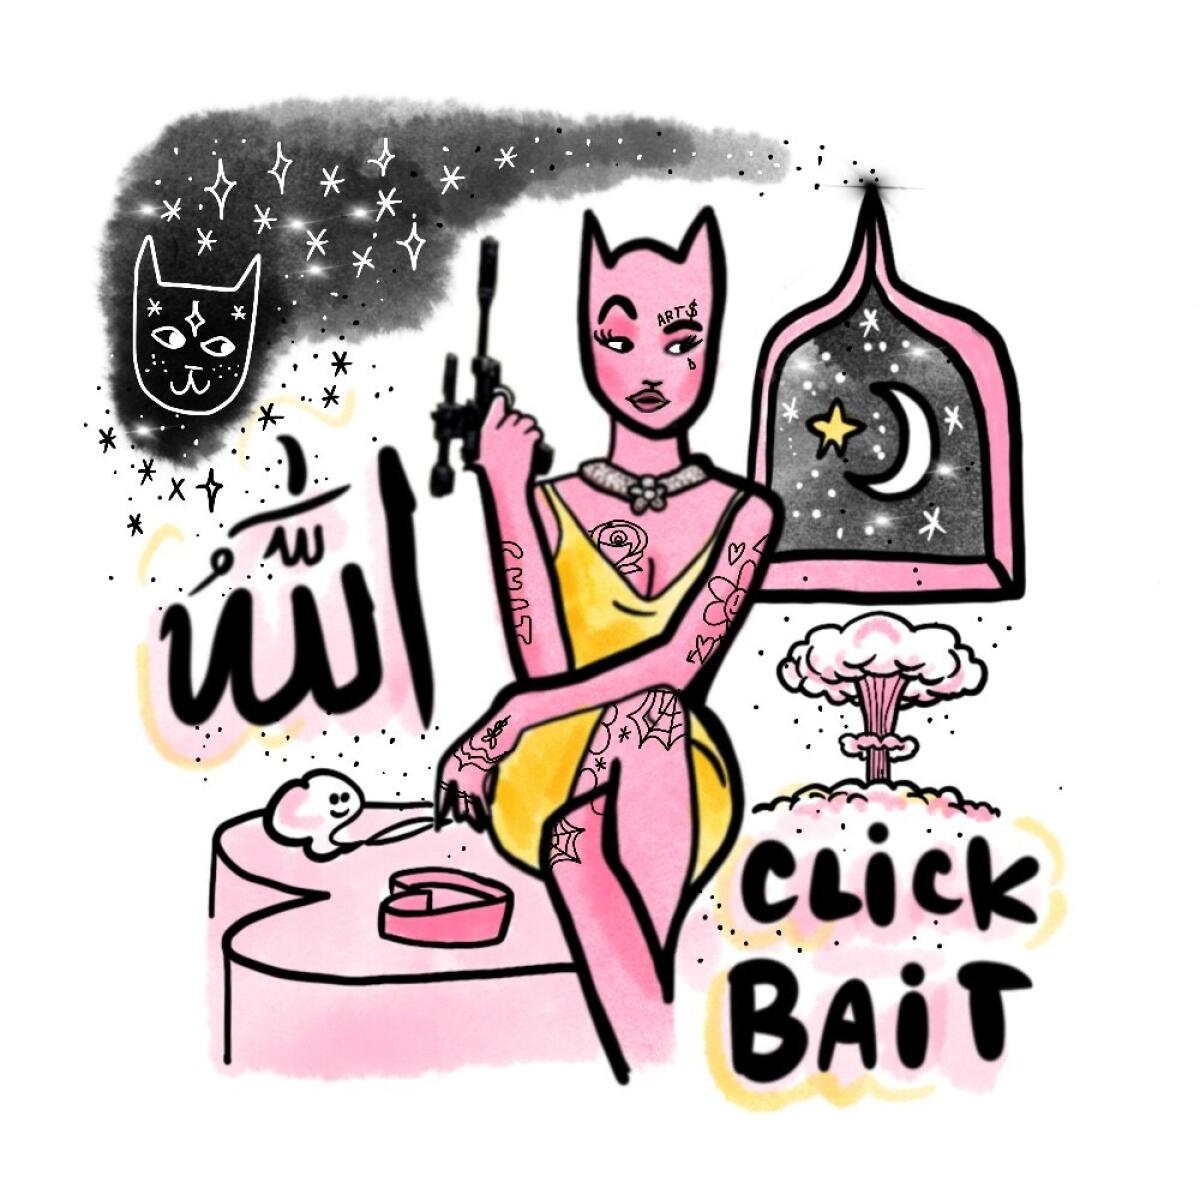 An illustration with the words "Click bait"